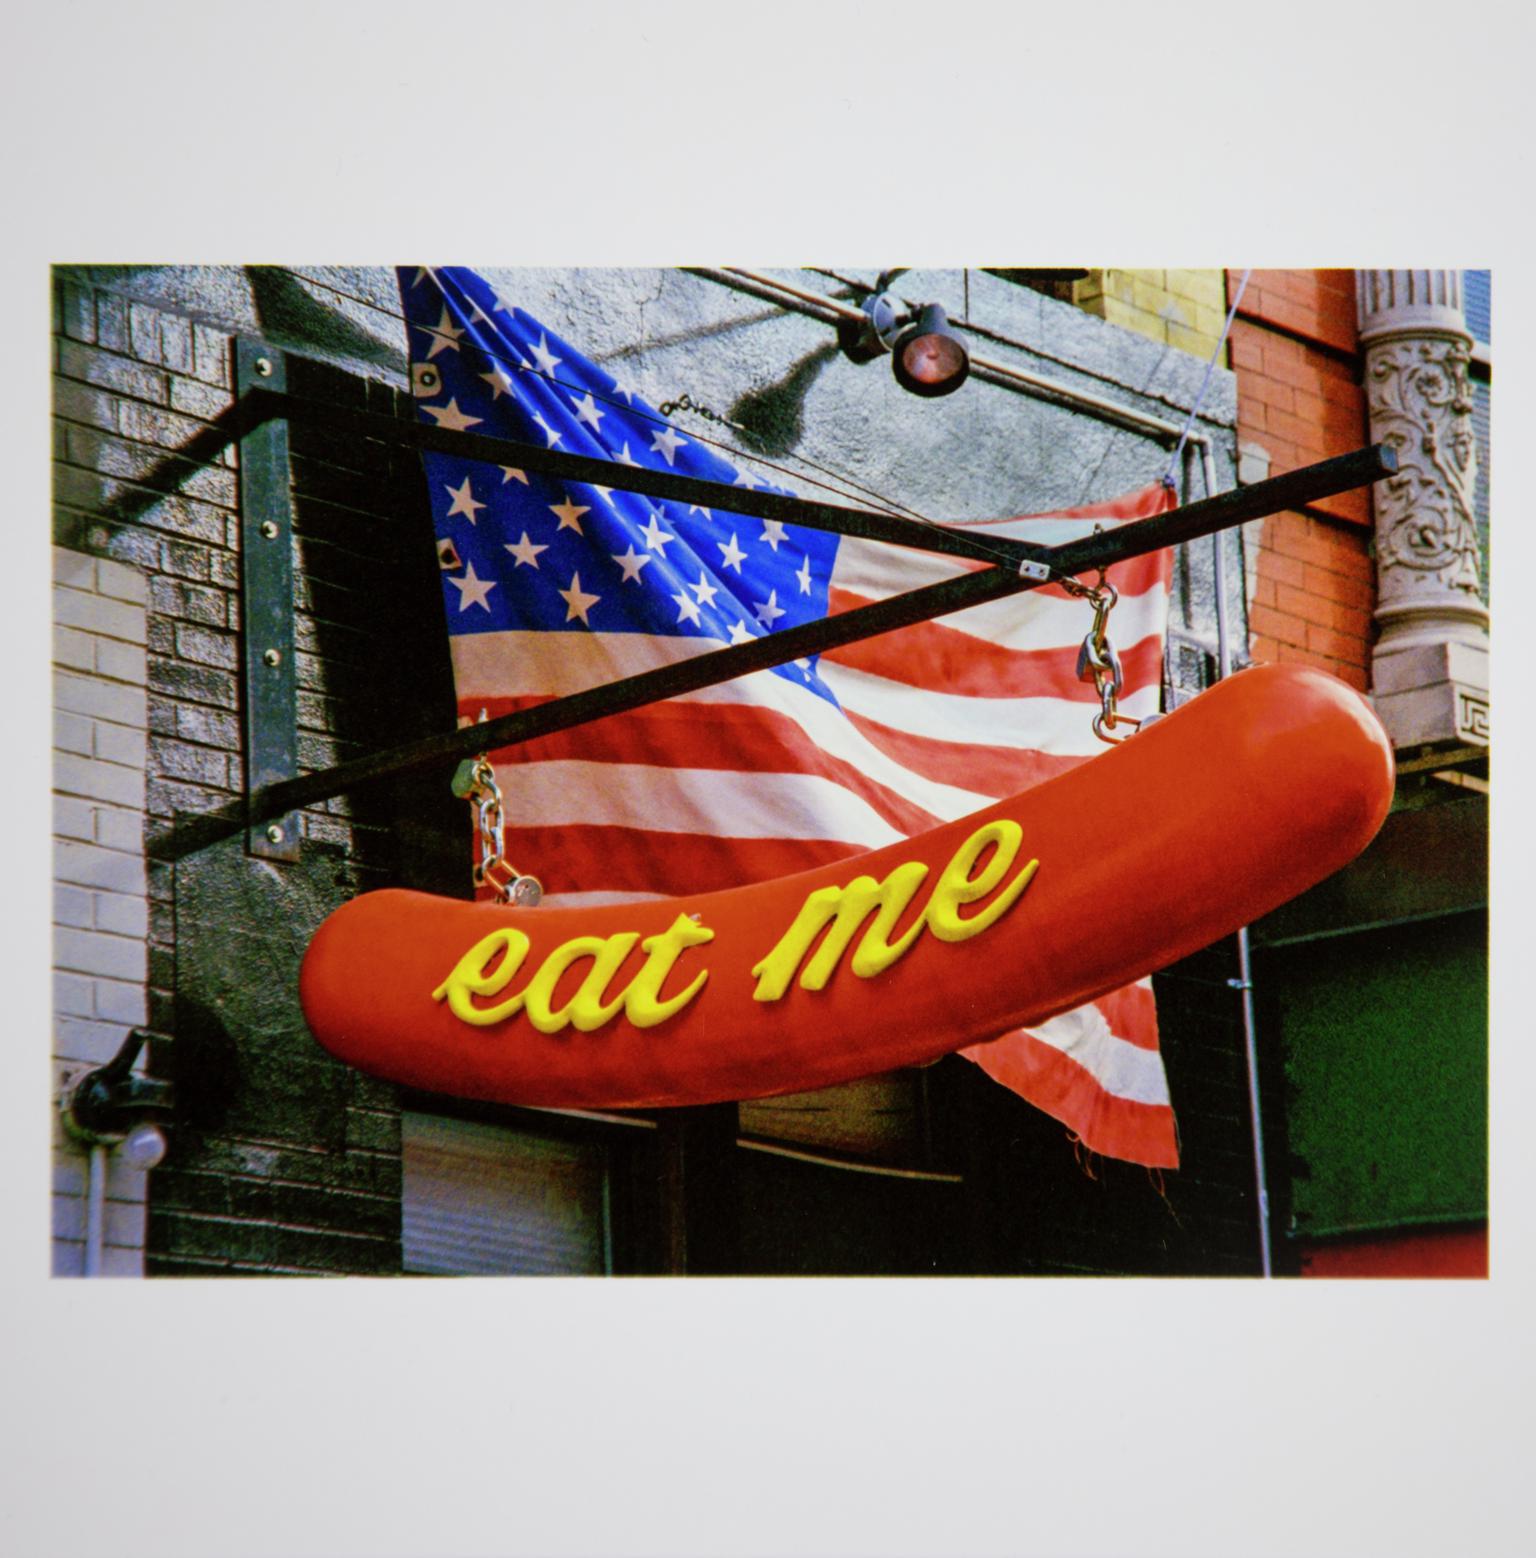 Eat me and the American flag, Downtown Manhattan. New York City